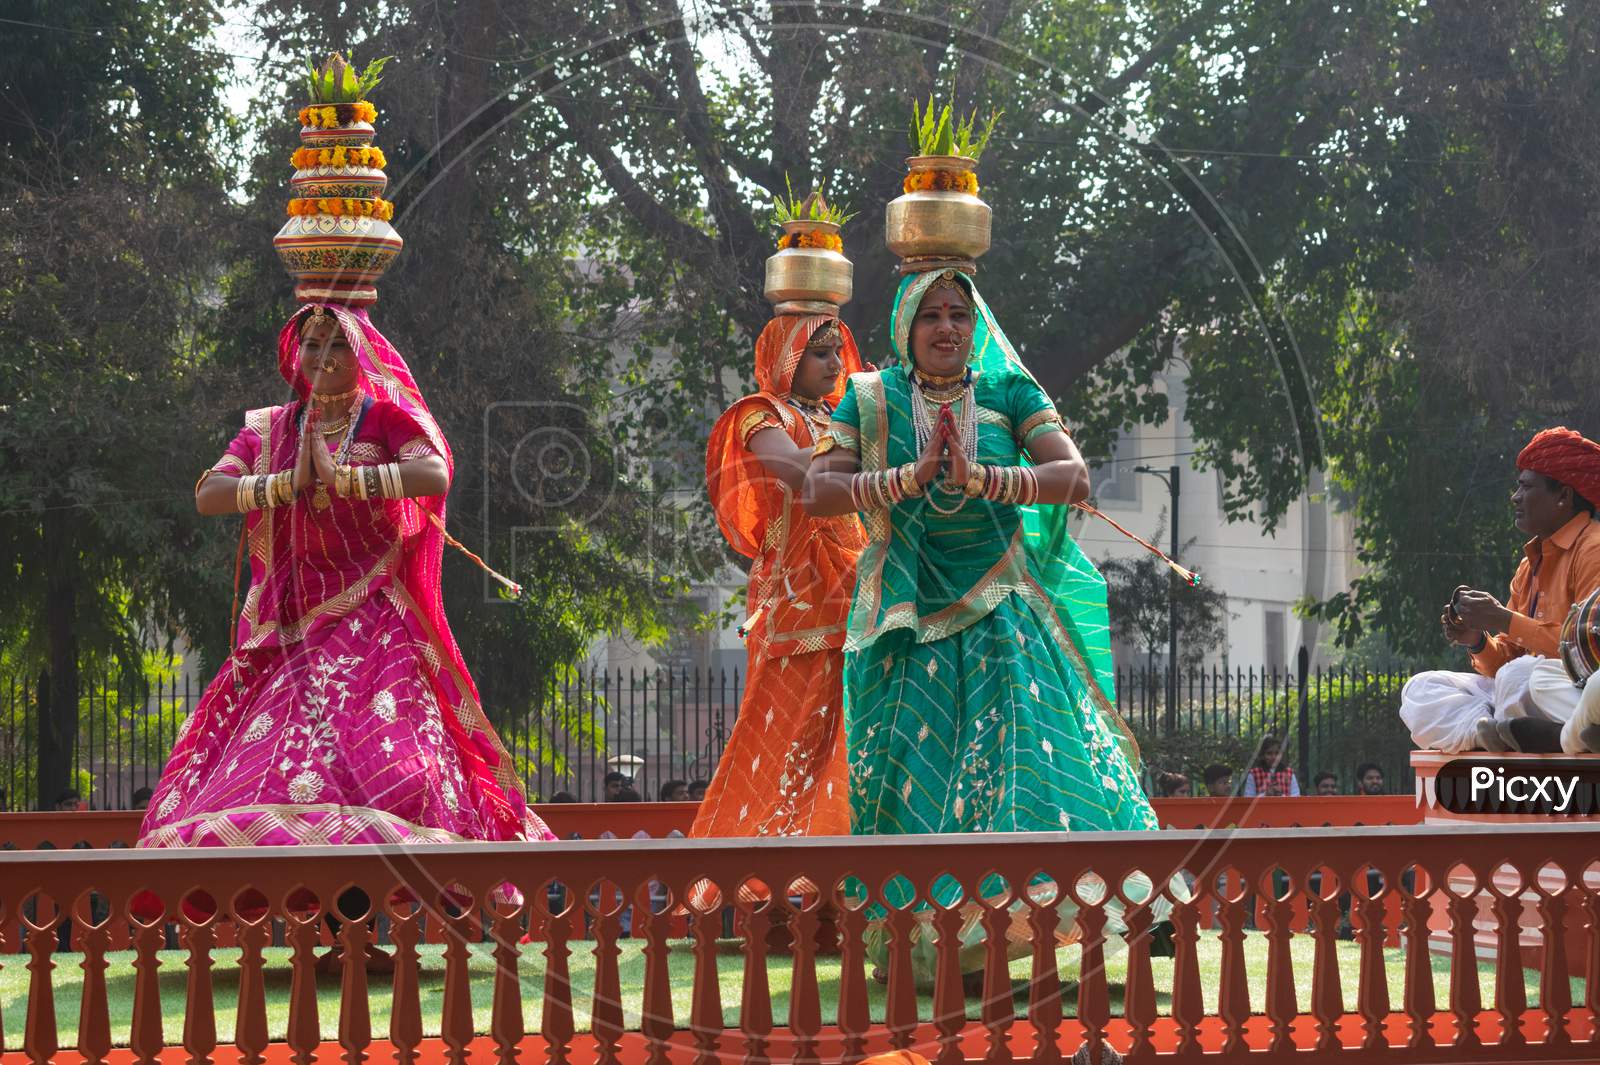 Tableau of Rajasthan state shows culture of rajasthan on 71st republic Day 2020